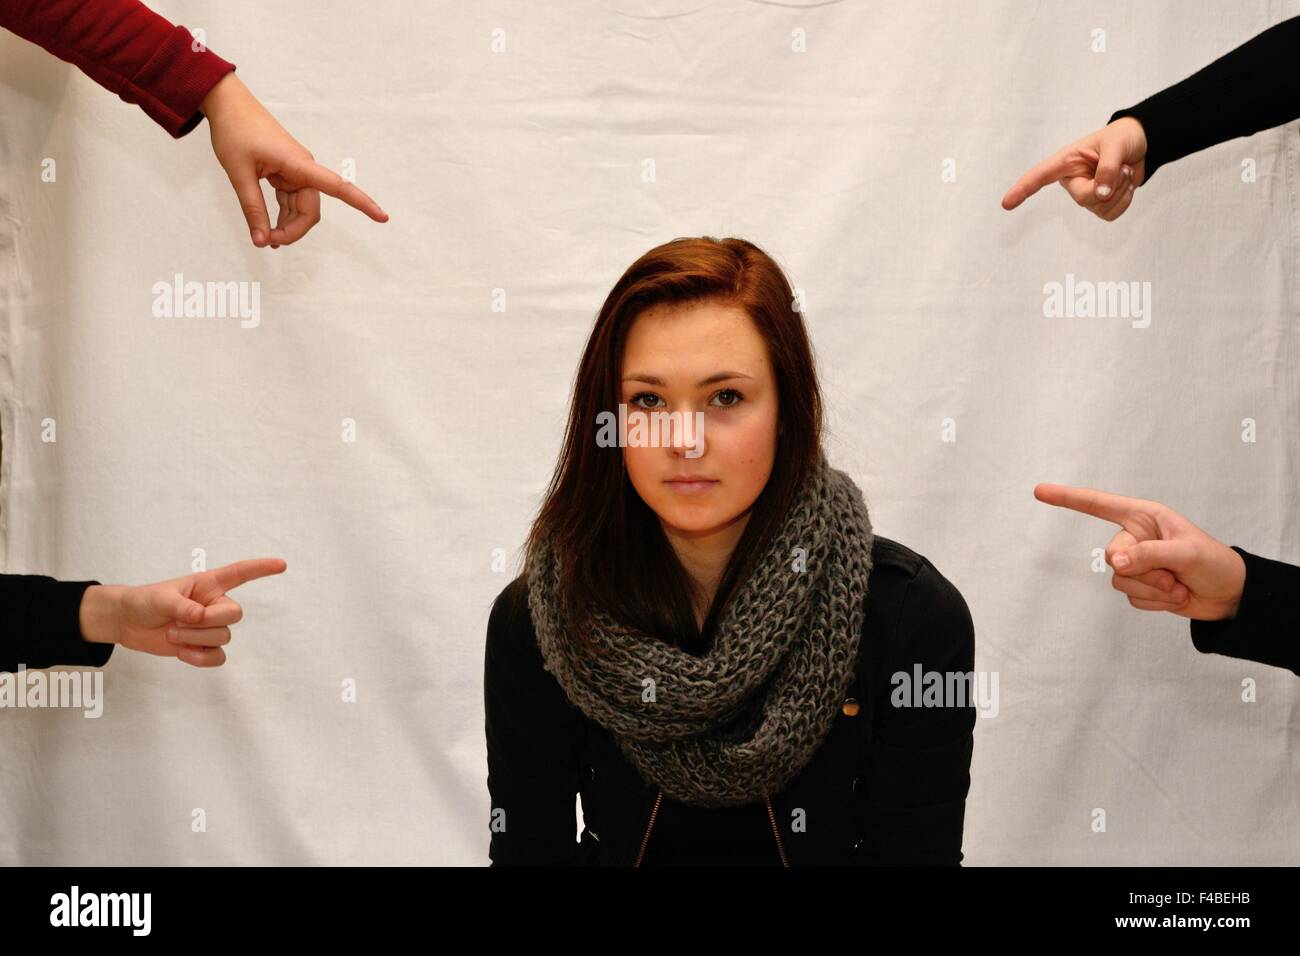 Persons with finger pointing on girls Stock Photo